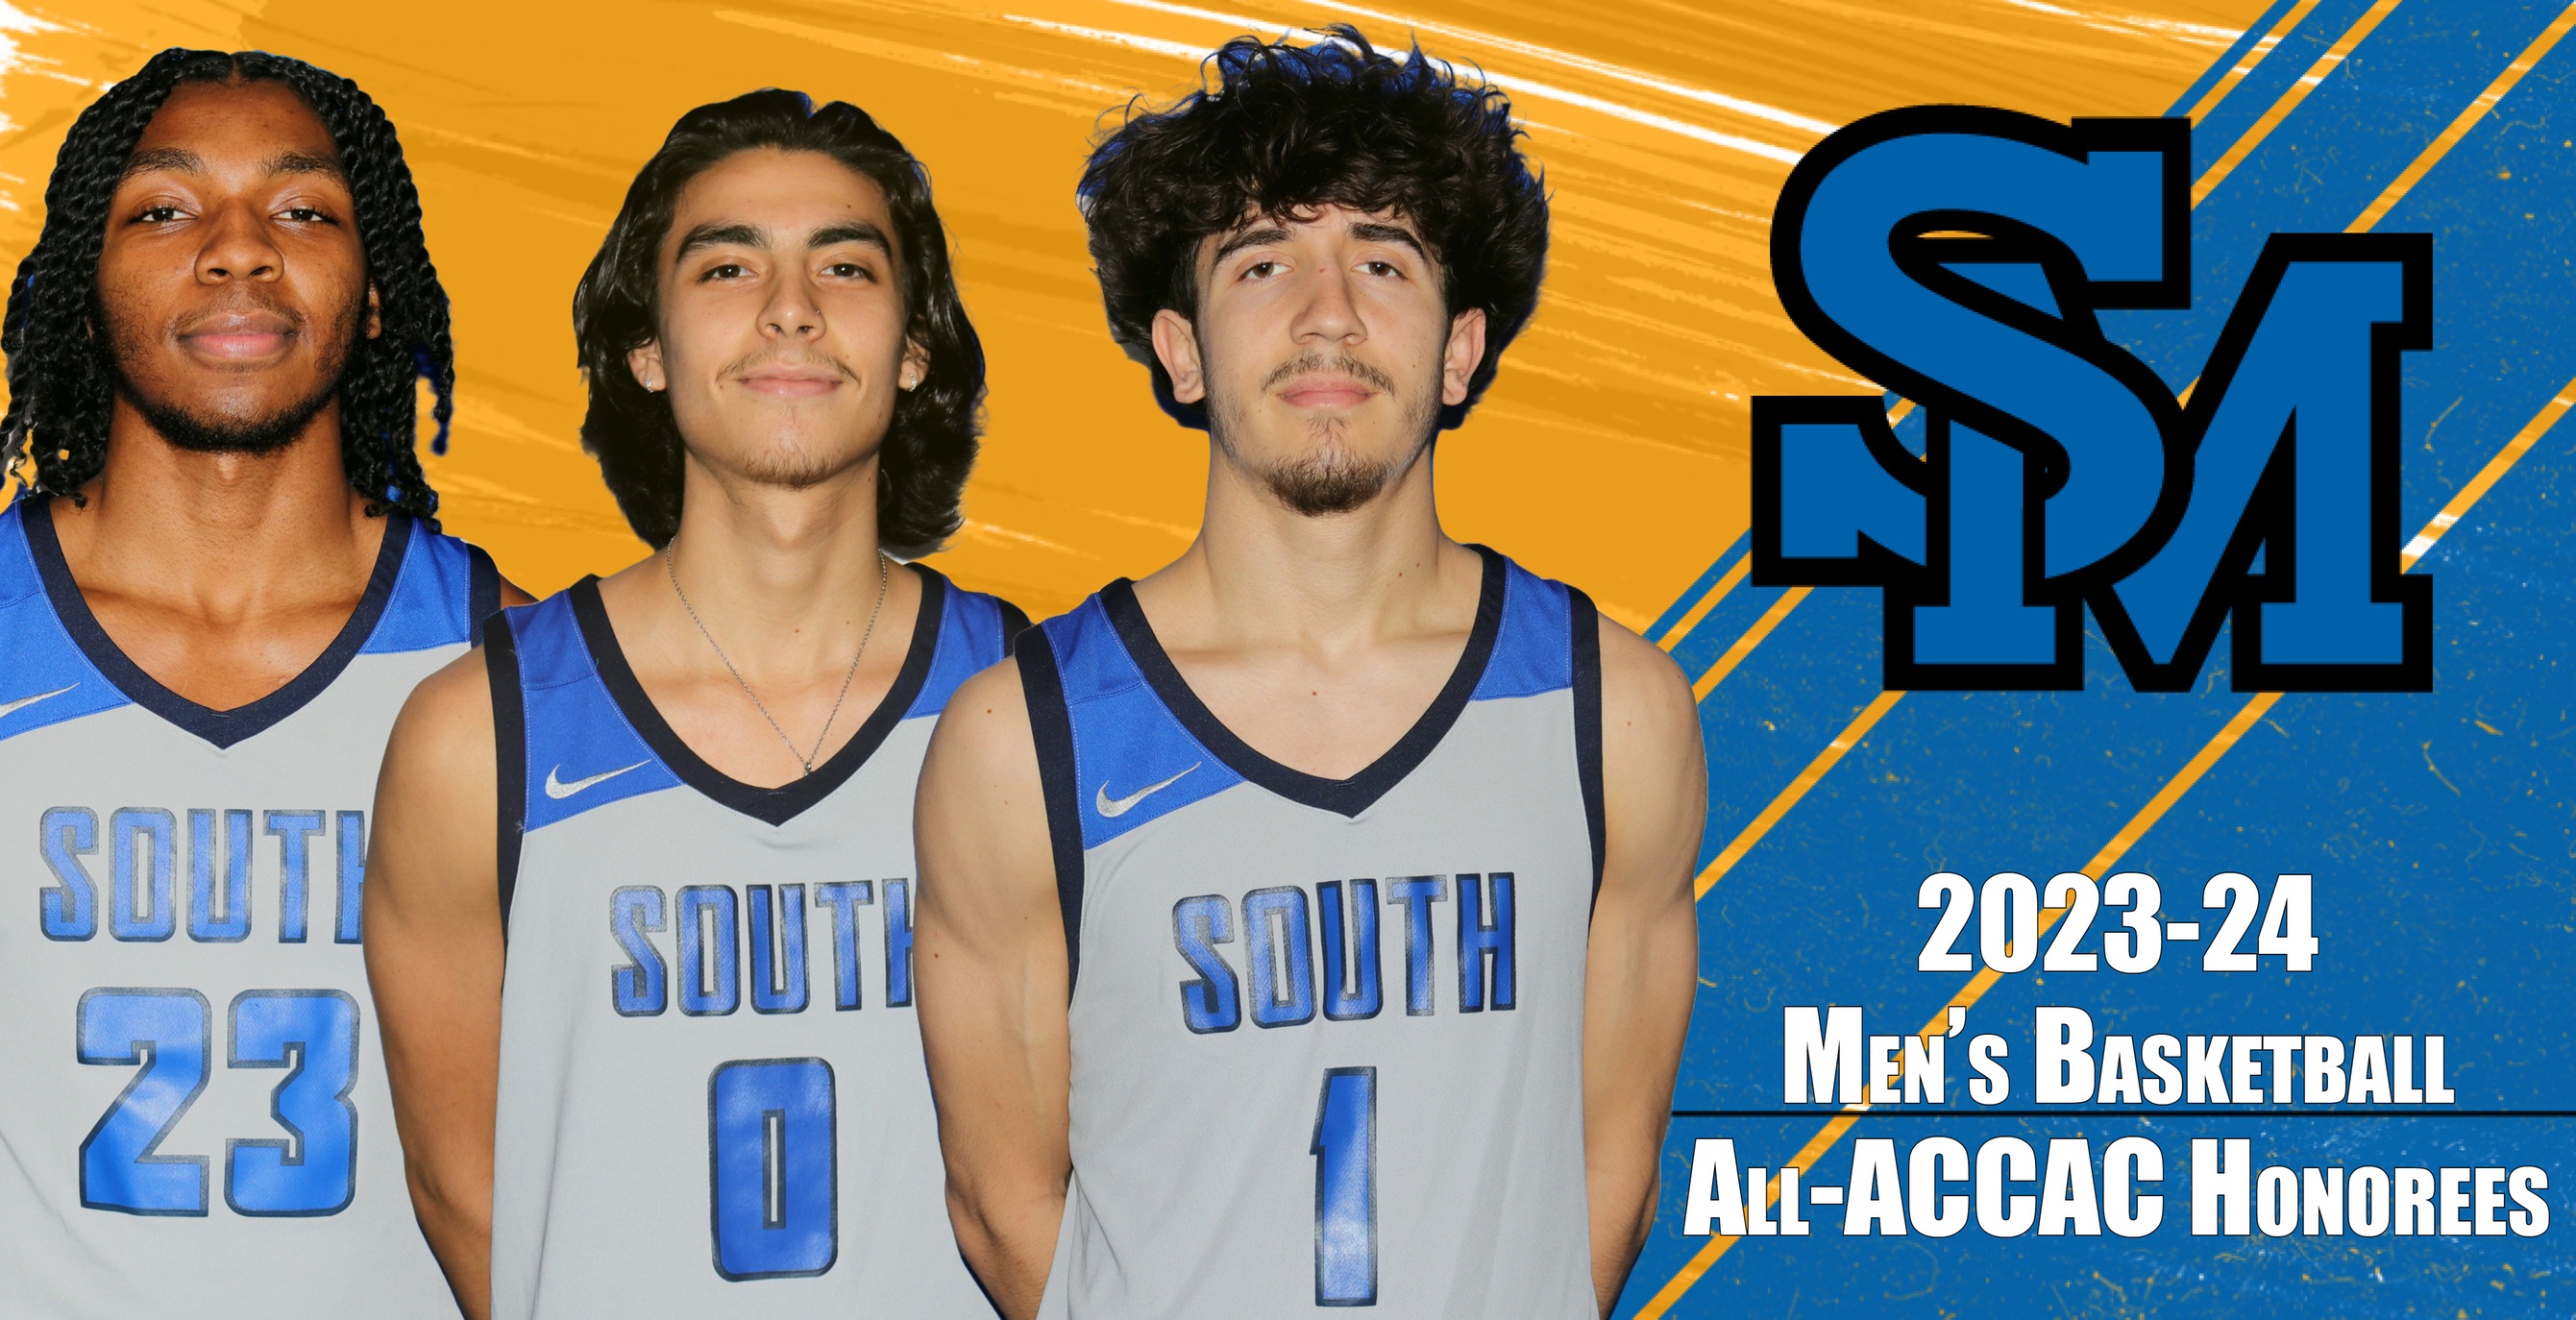 Wesley, Holcomb, and Escalante Earn All-ACCAC Honors